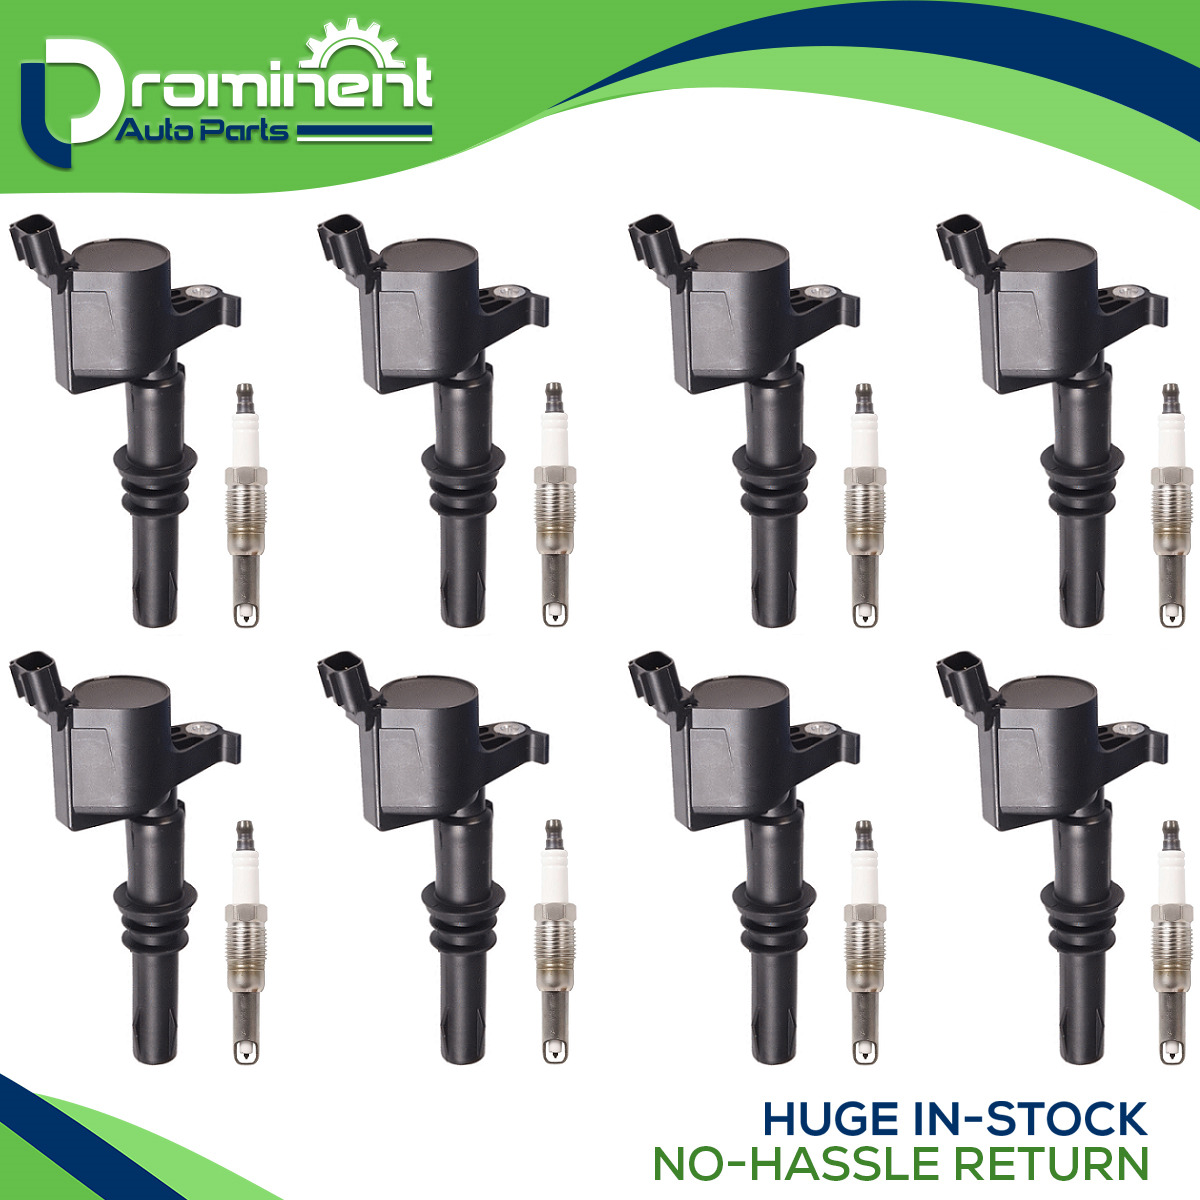 Ignition Coils & Spark Plugs for 2005-2007 Ford F150 Truck V8 5.4L DG511